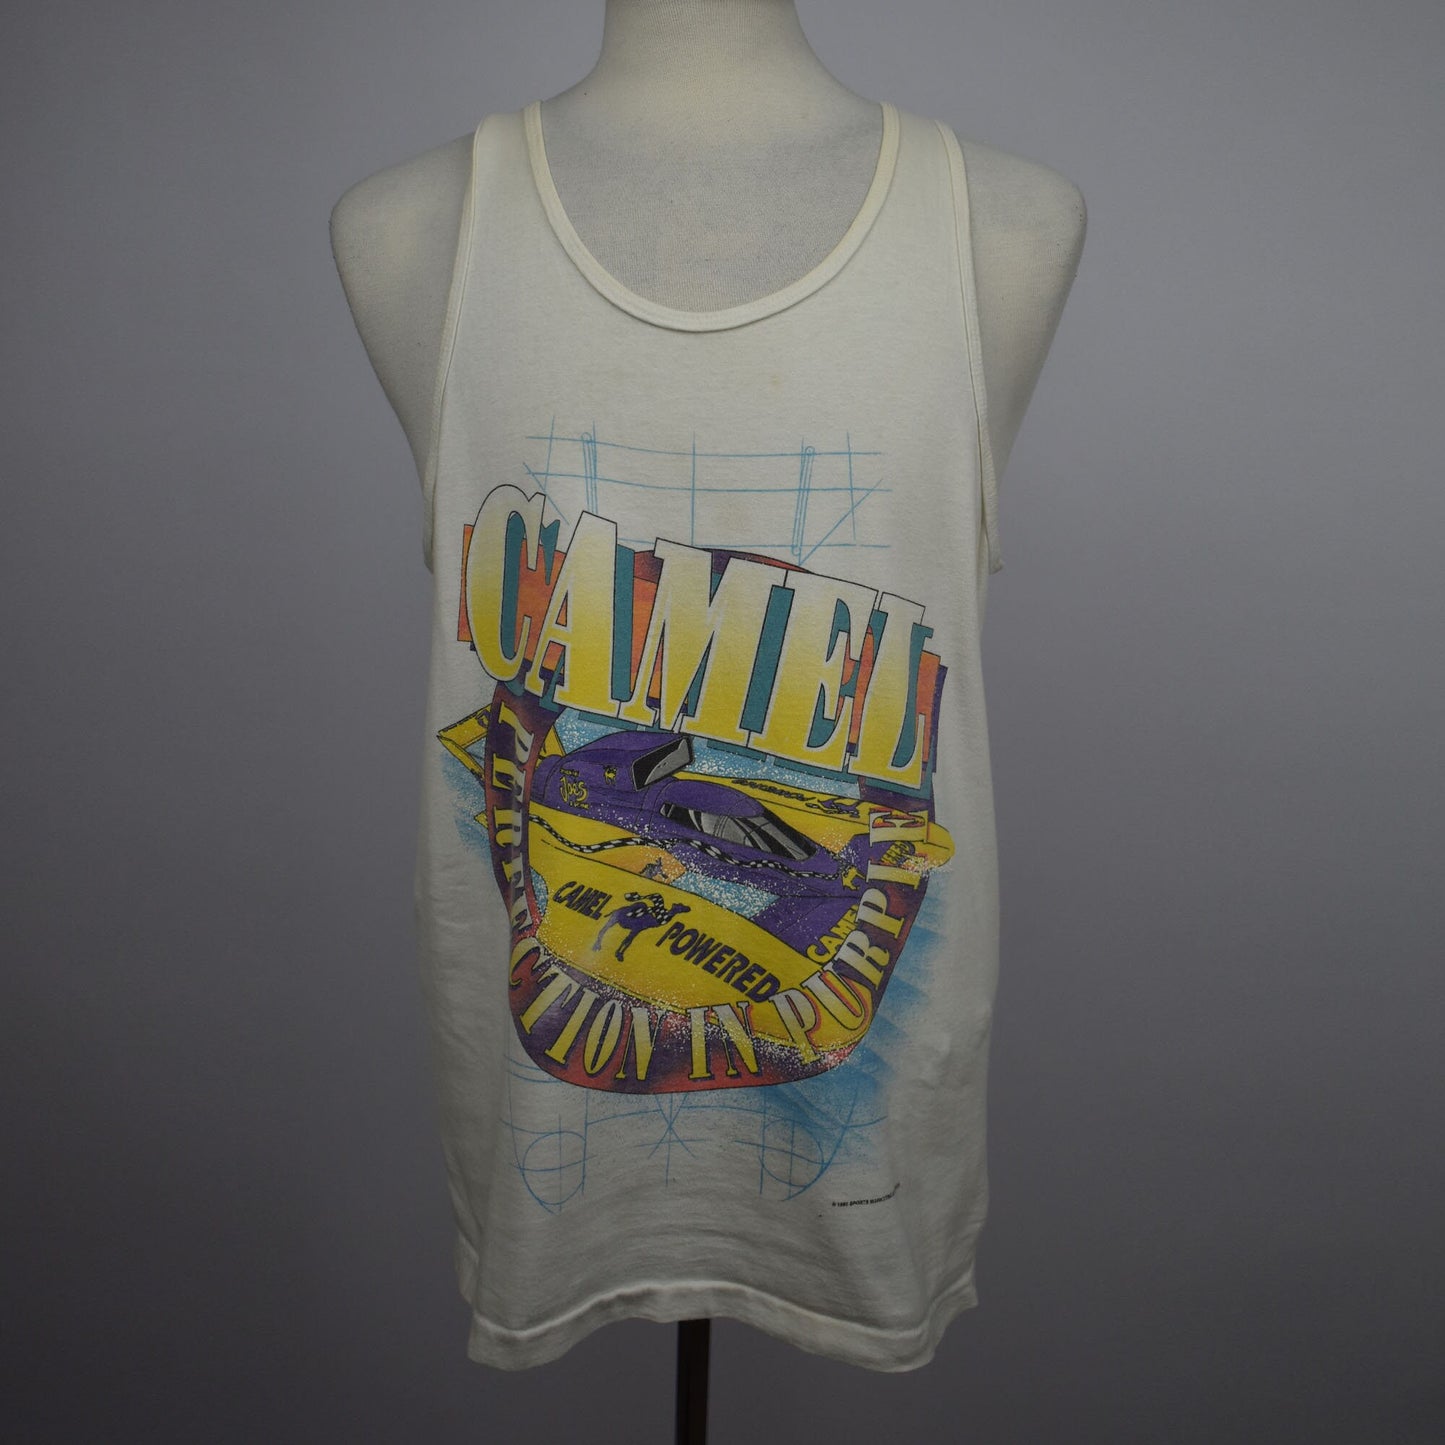 Vintage 1995 Camel Cigarettes Perfection in Purple Tank Top - Made in USA - Size L